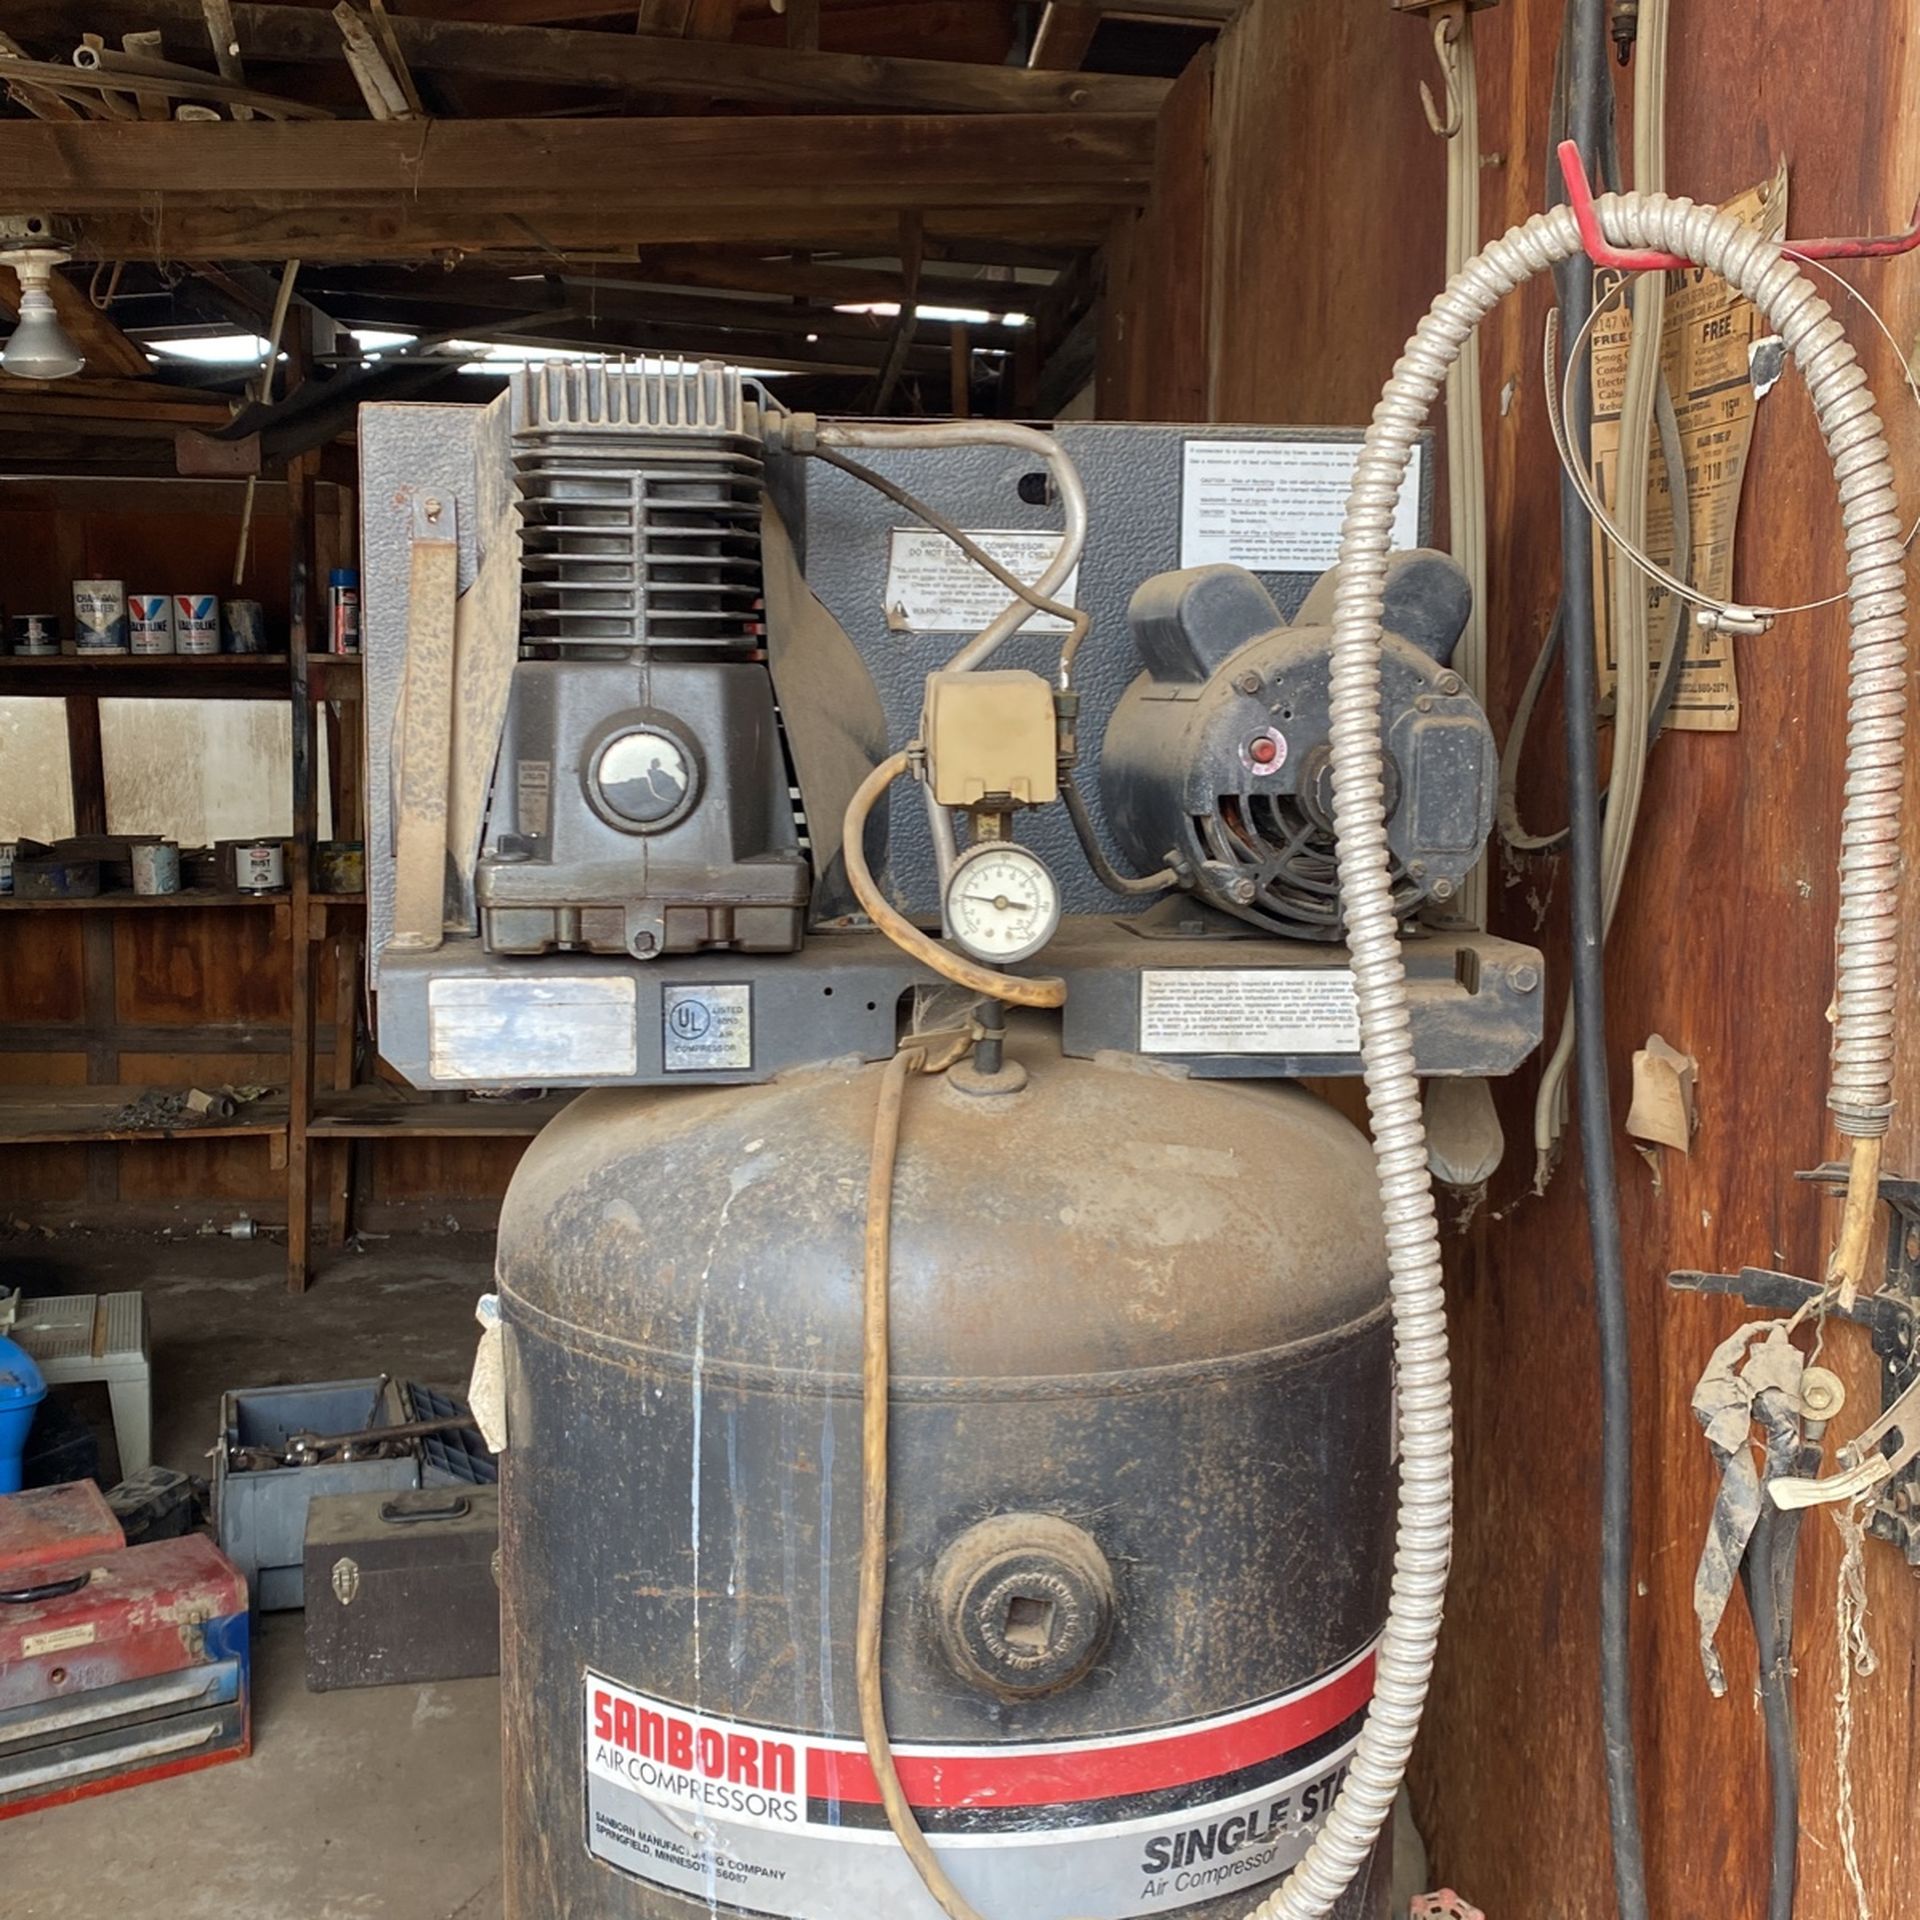 New Black & Decker 4 Gallon Compressor for Sale in Smithtown, NY - OfferUp